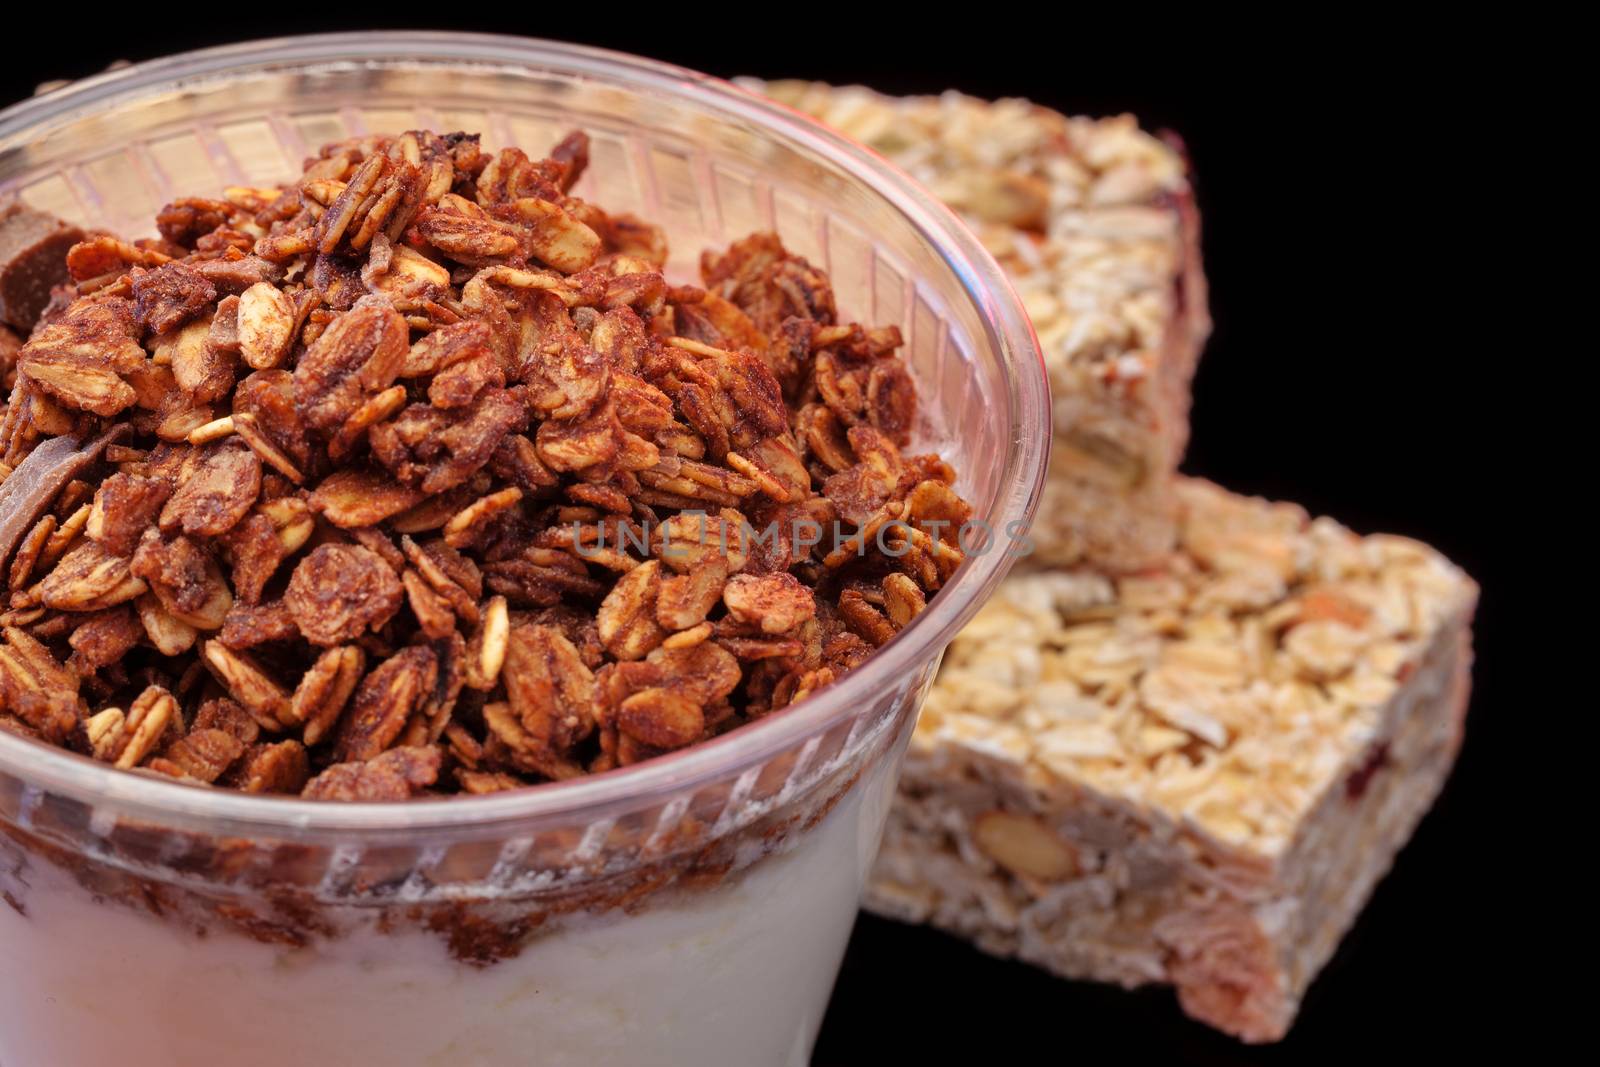 Yogurt with chocolade granola and granola bar with fruits and nuts on black background with copyspace